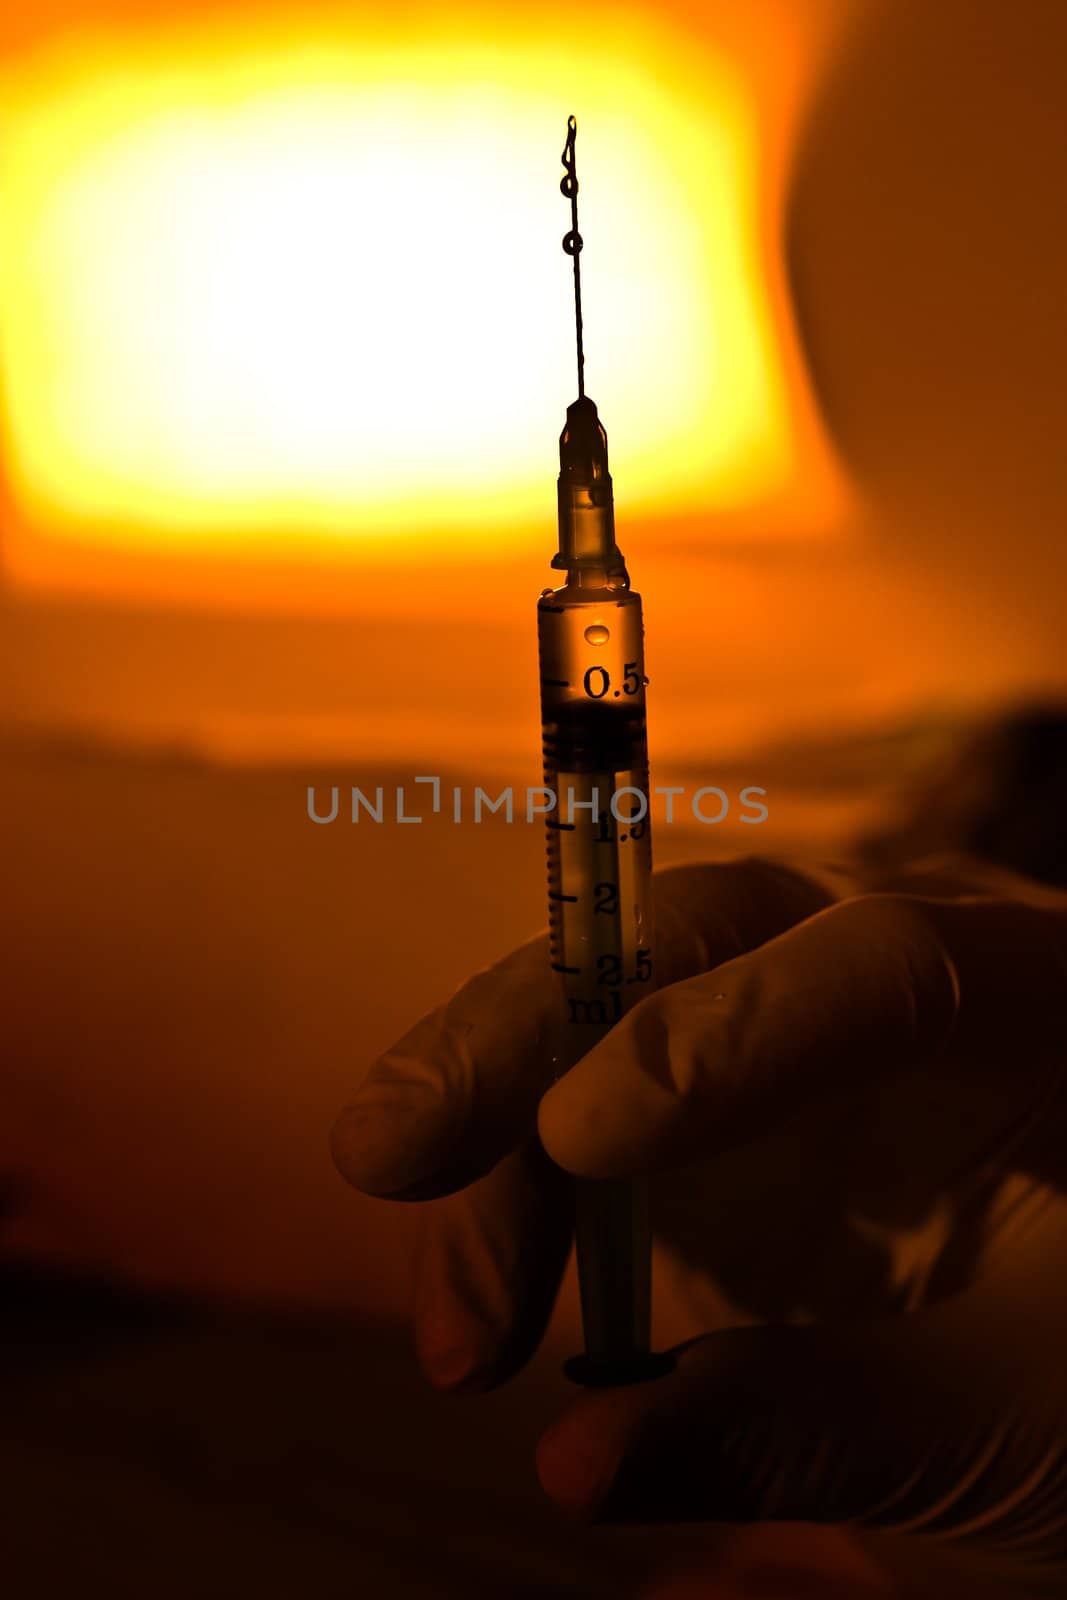 medical theme: syringe in yhe hands